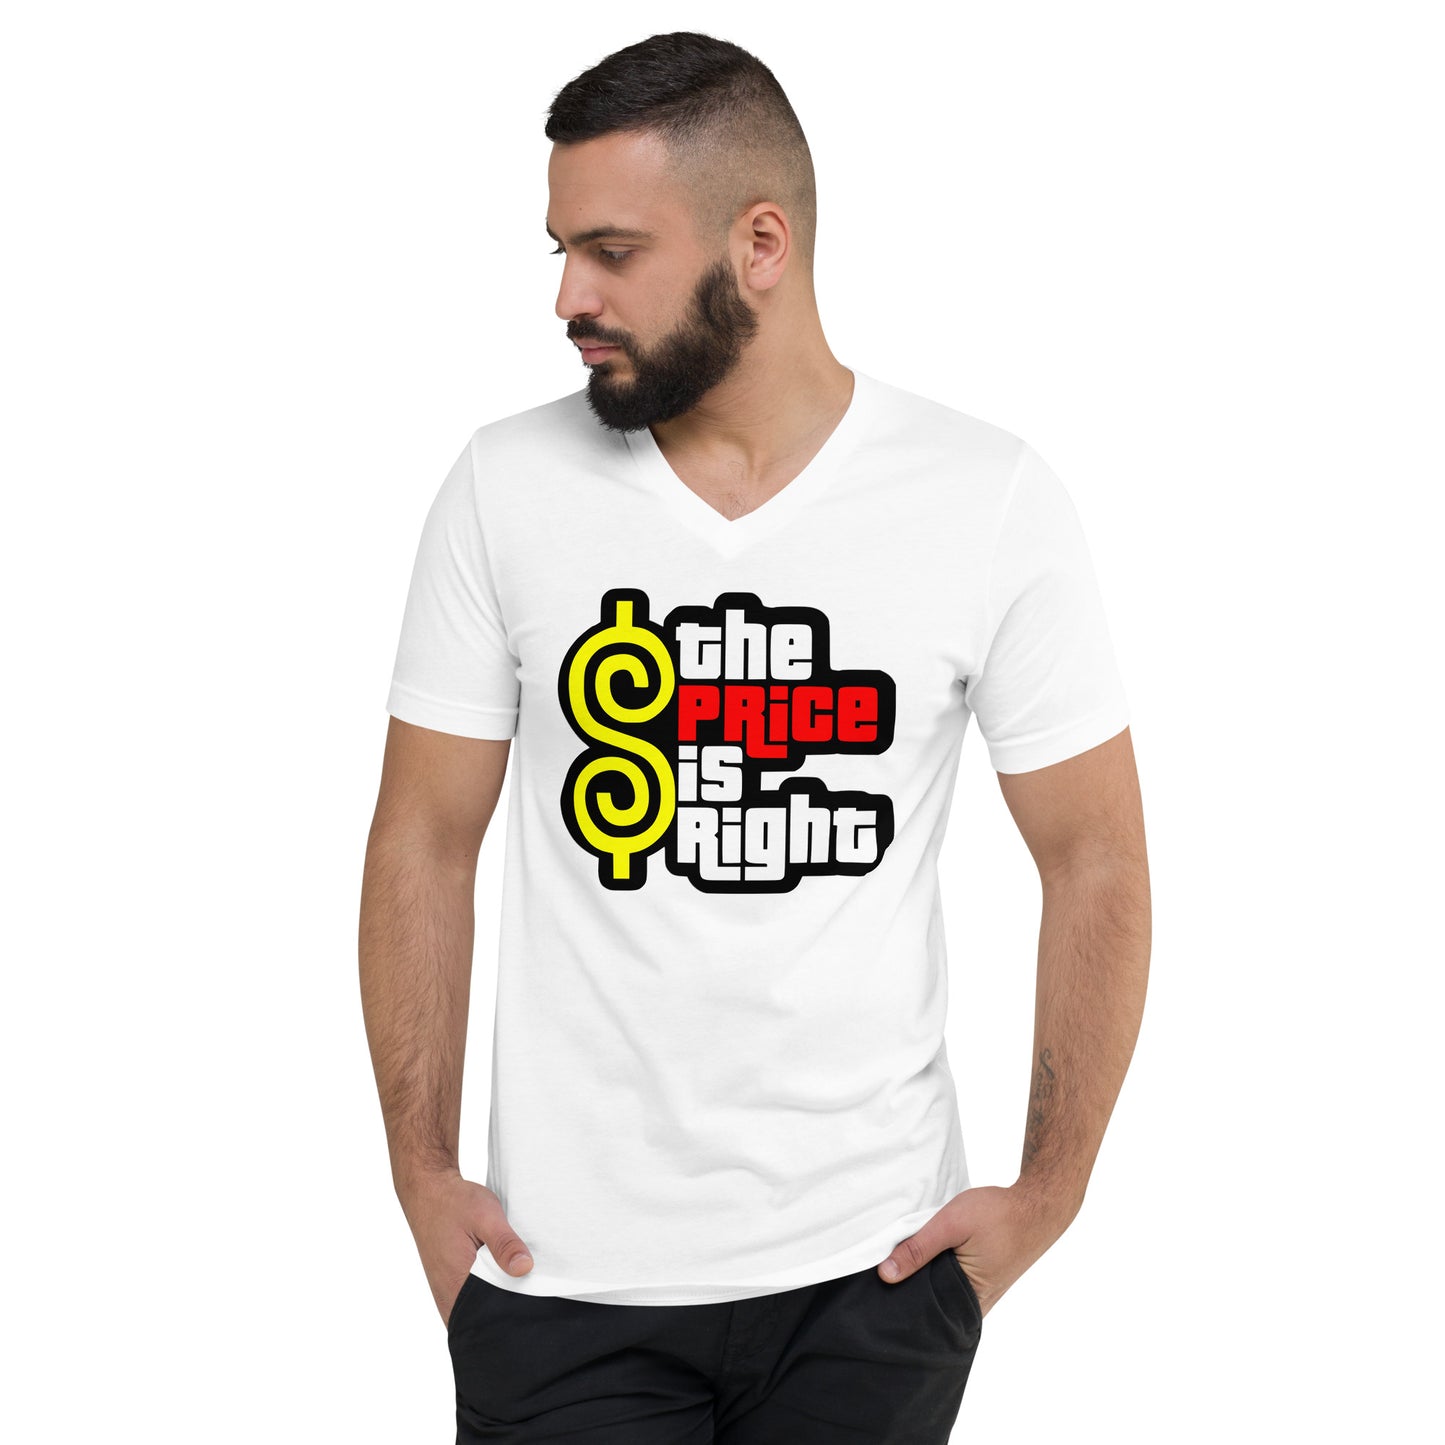 Unisex Short Sleeve V-Neck T-Shirt - The Price is Right T-Shirt